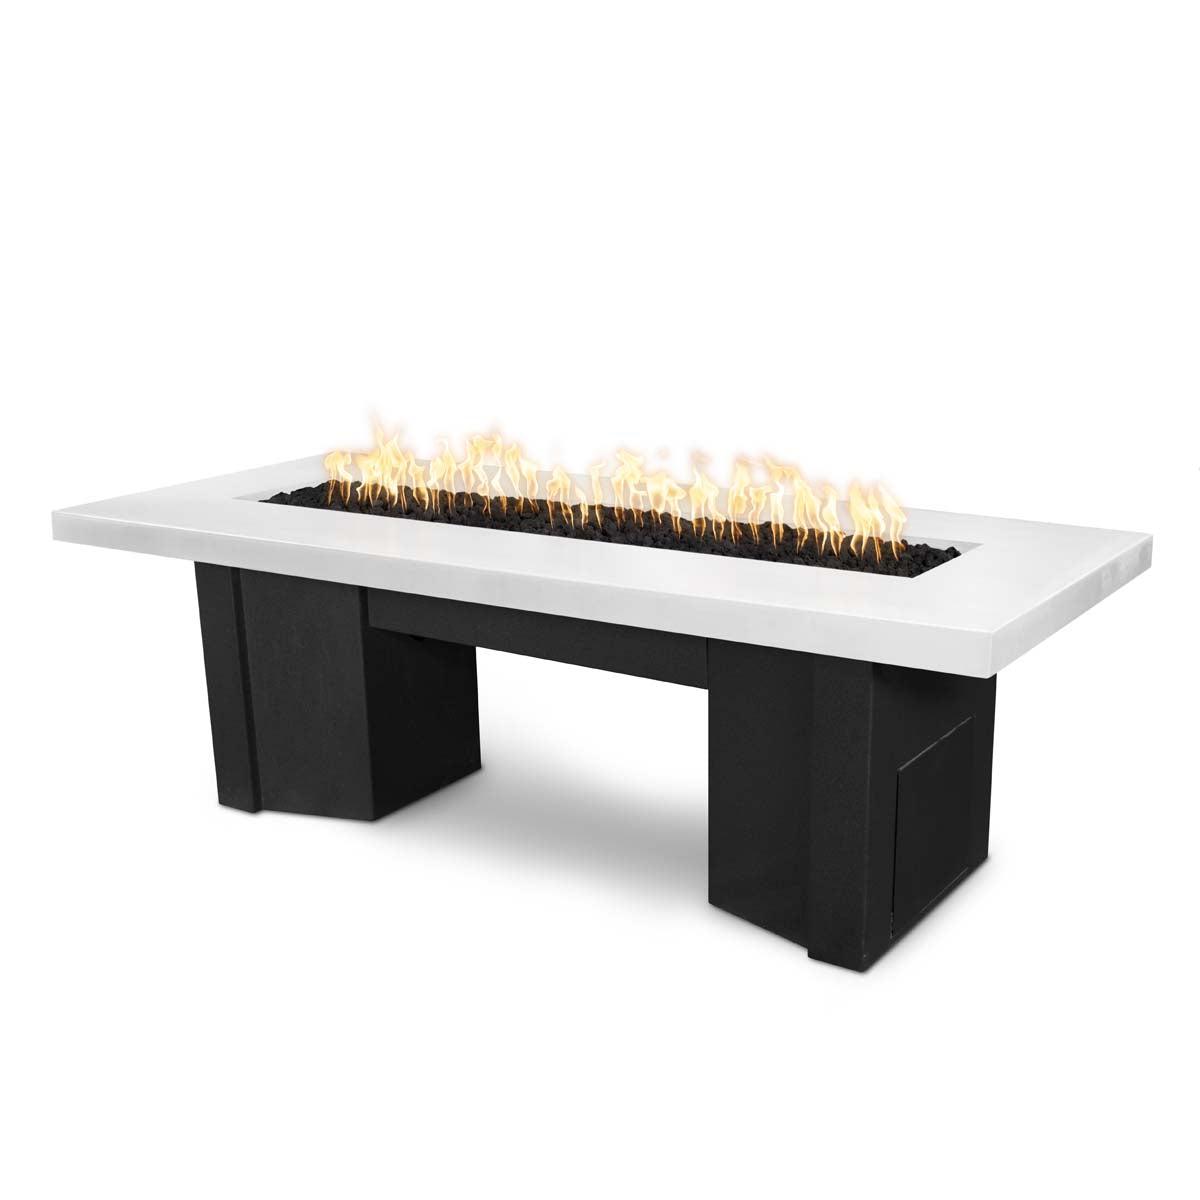 The Outdoor Plus Rectangular Alameda 78" Black & White Powder Coated Liquid Propane Fire Pit with 12V Electronic Ignition